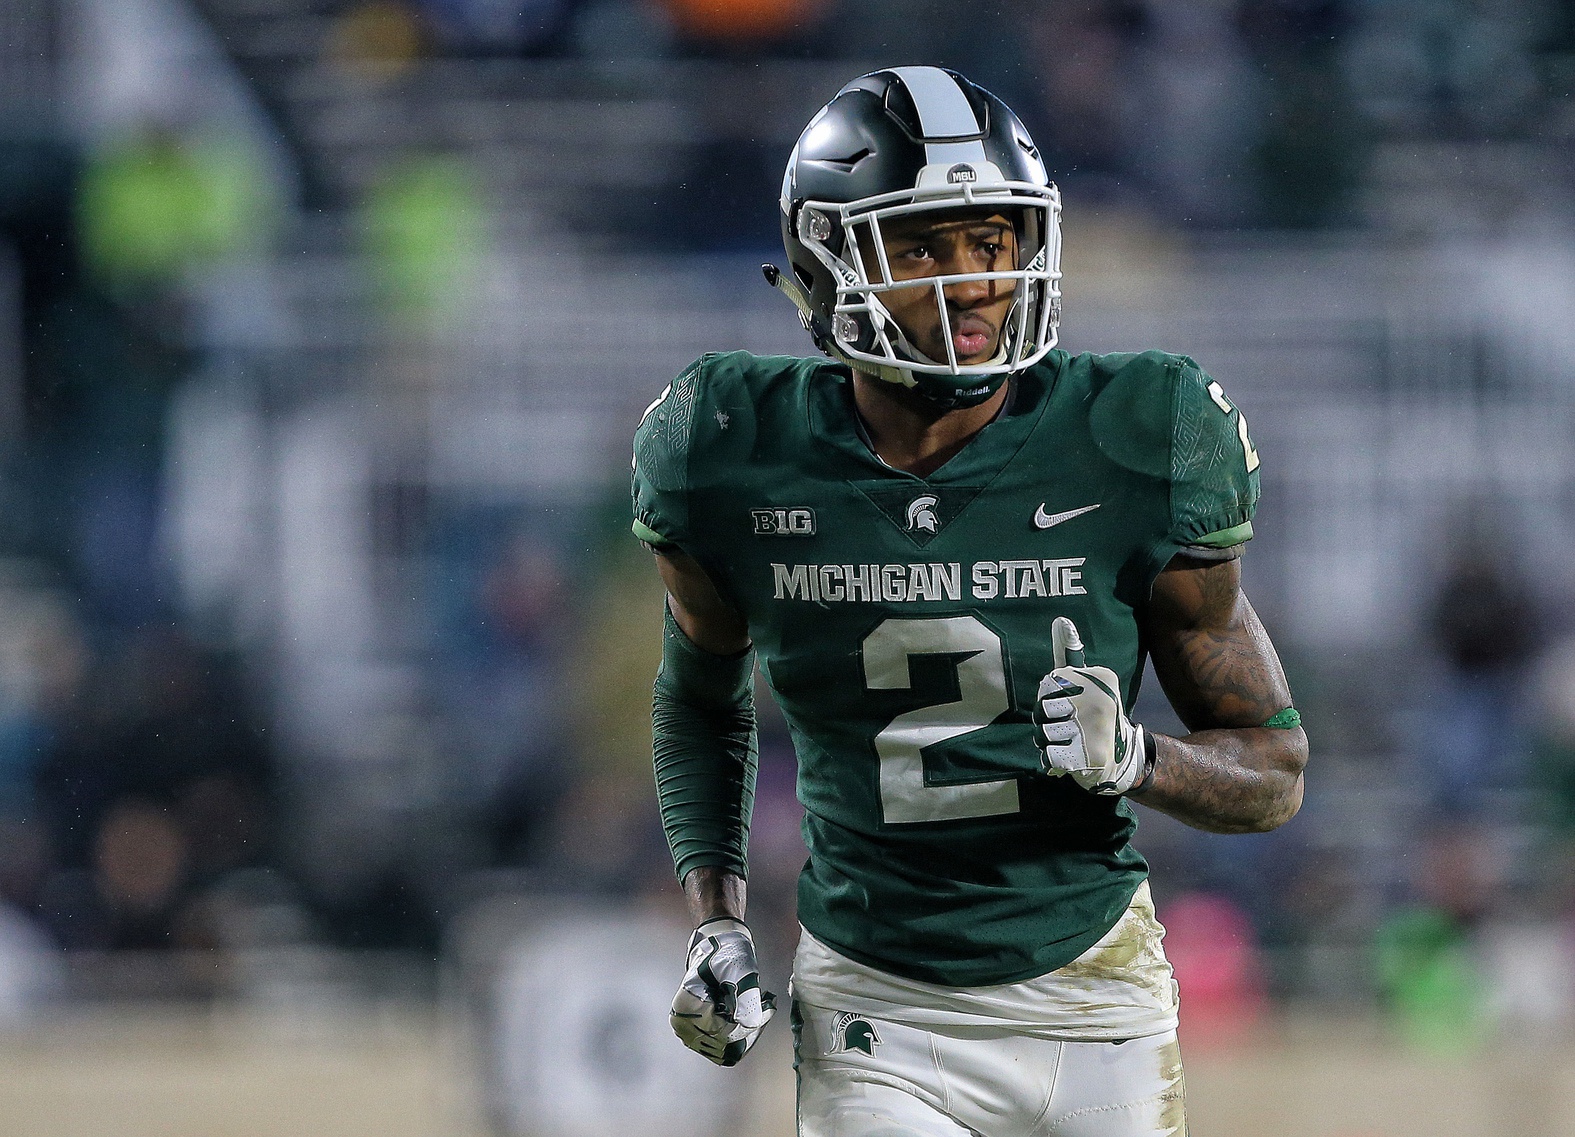 Get to know the 2017 Michigan State football roster - The Only Colors